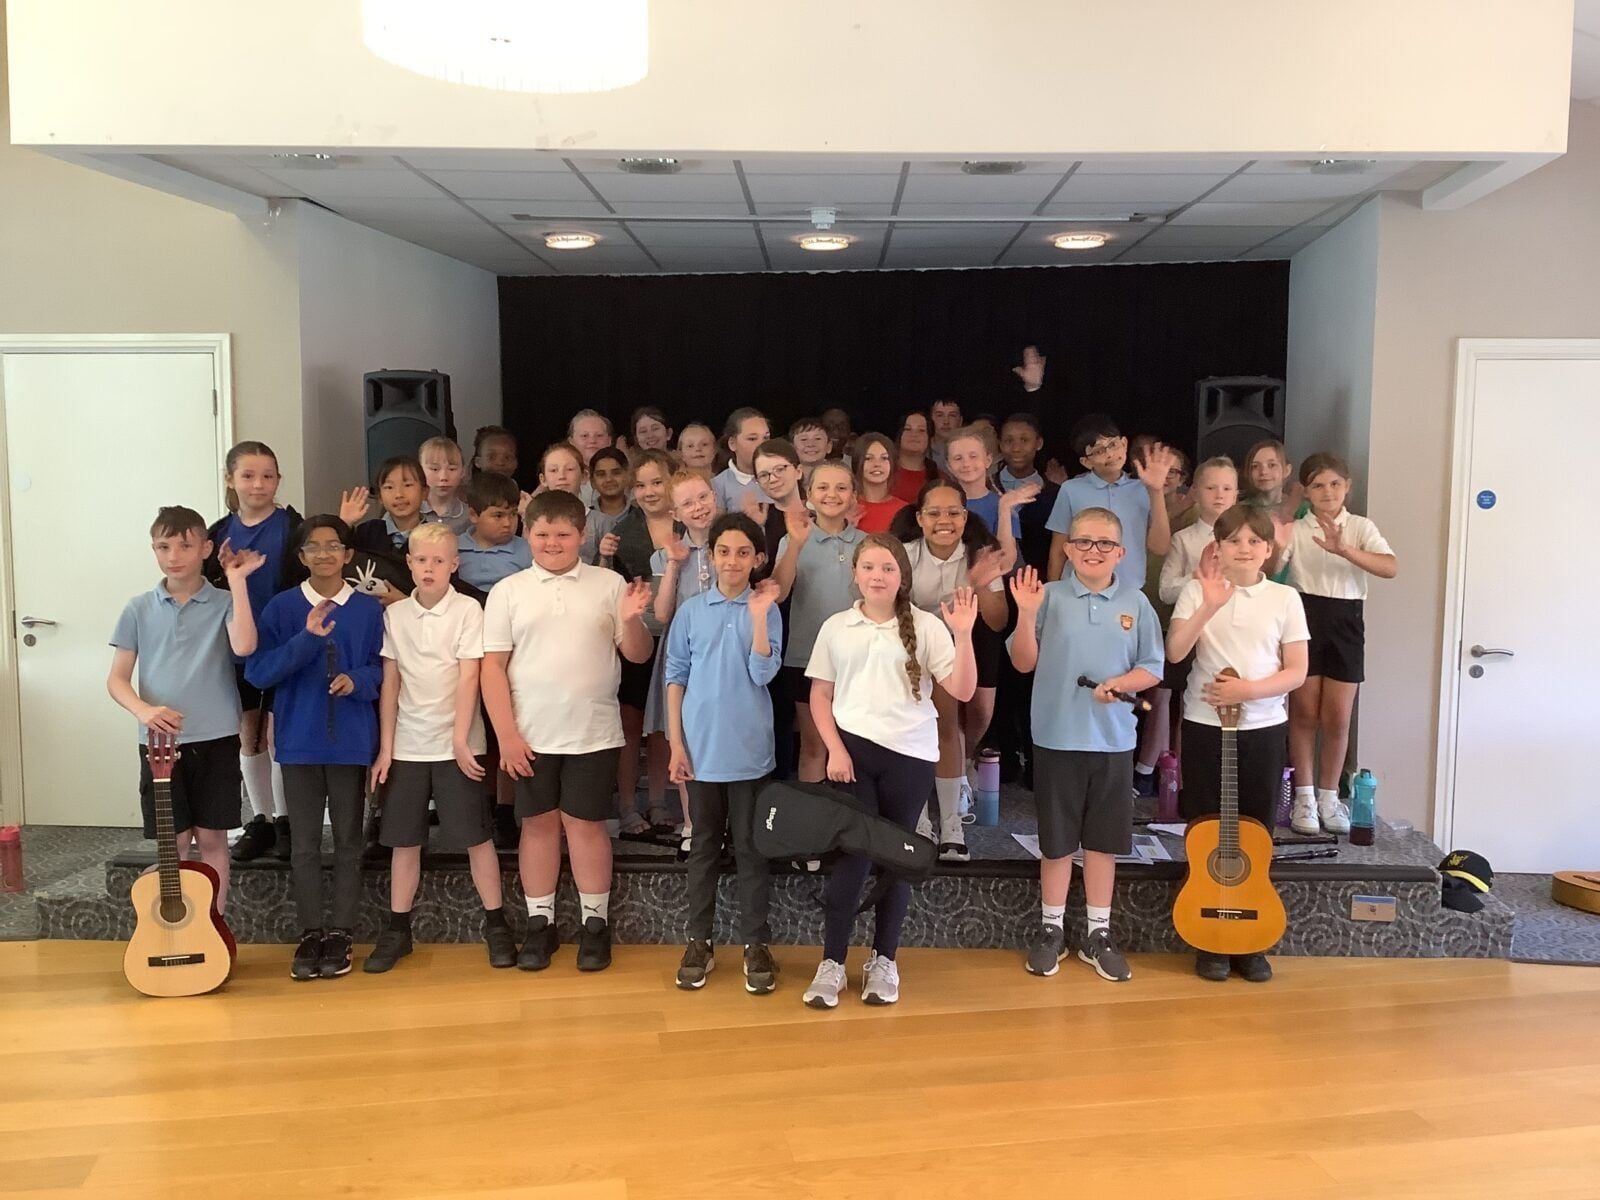 Dudley school children take their music show on the road